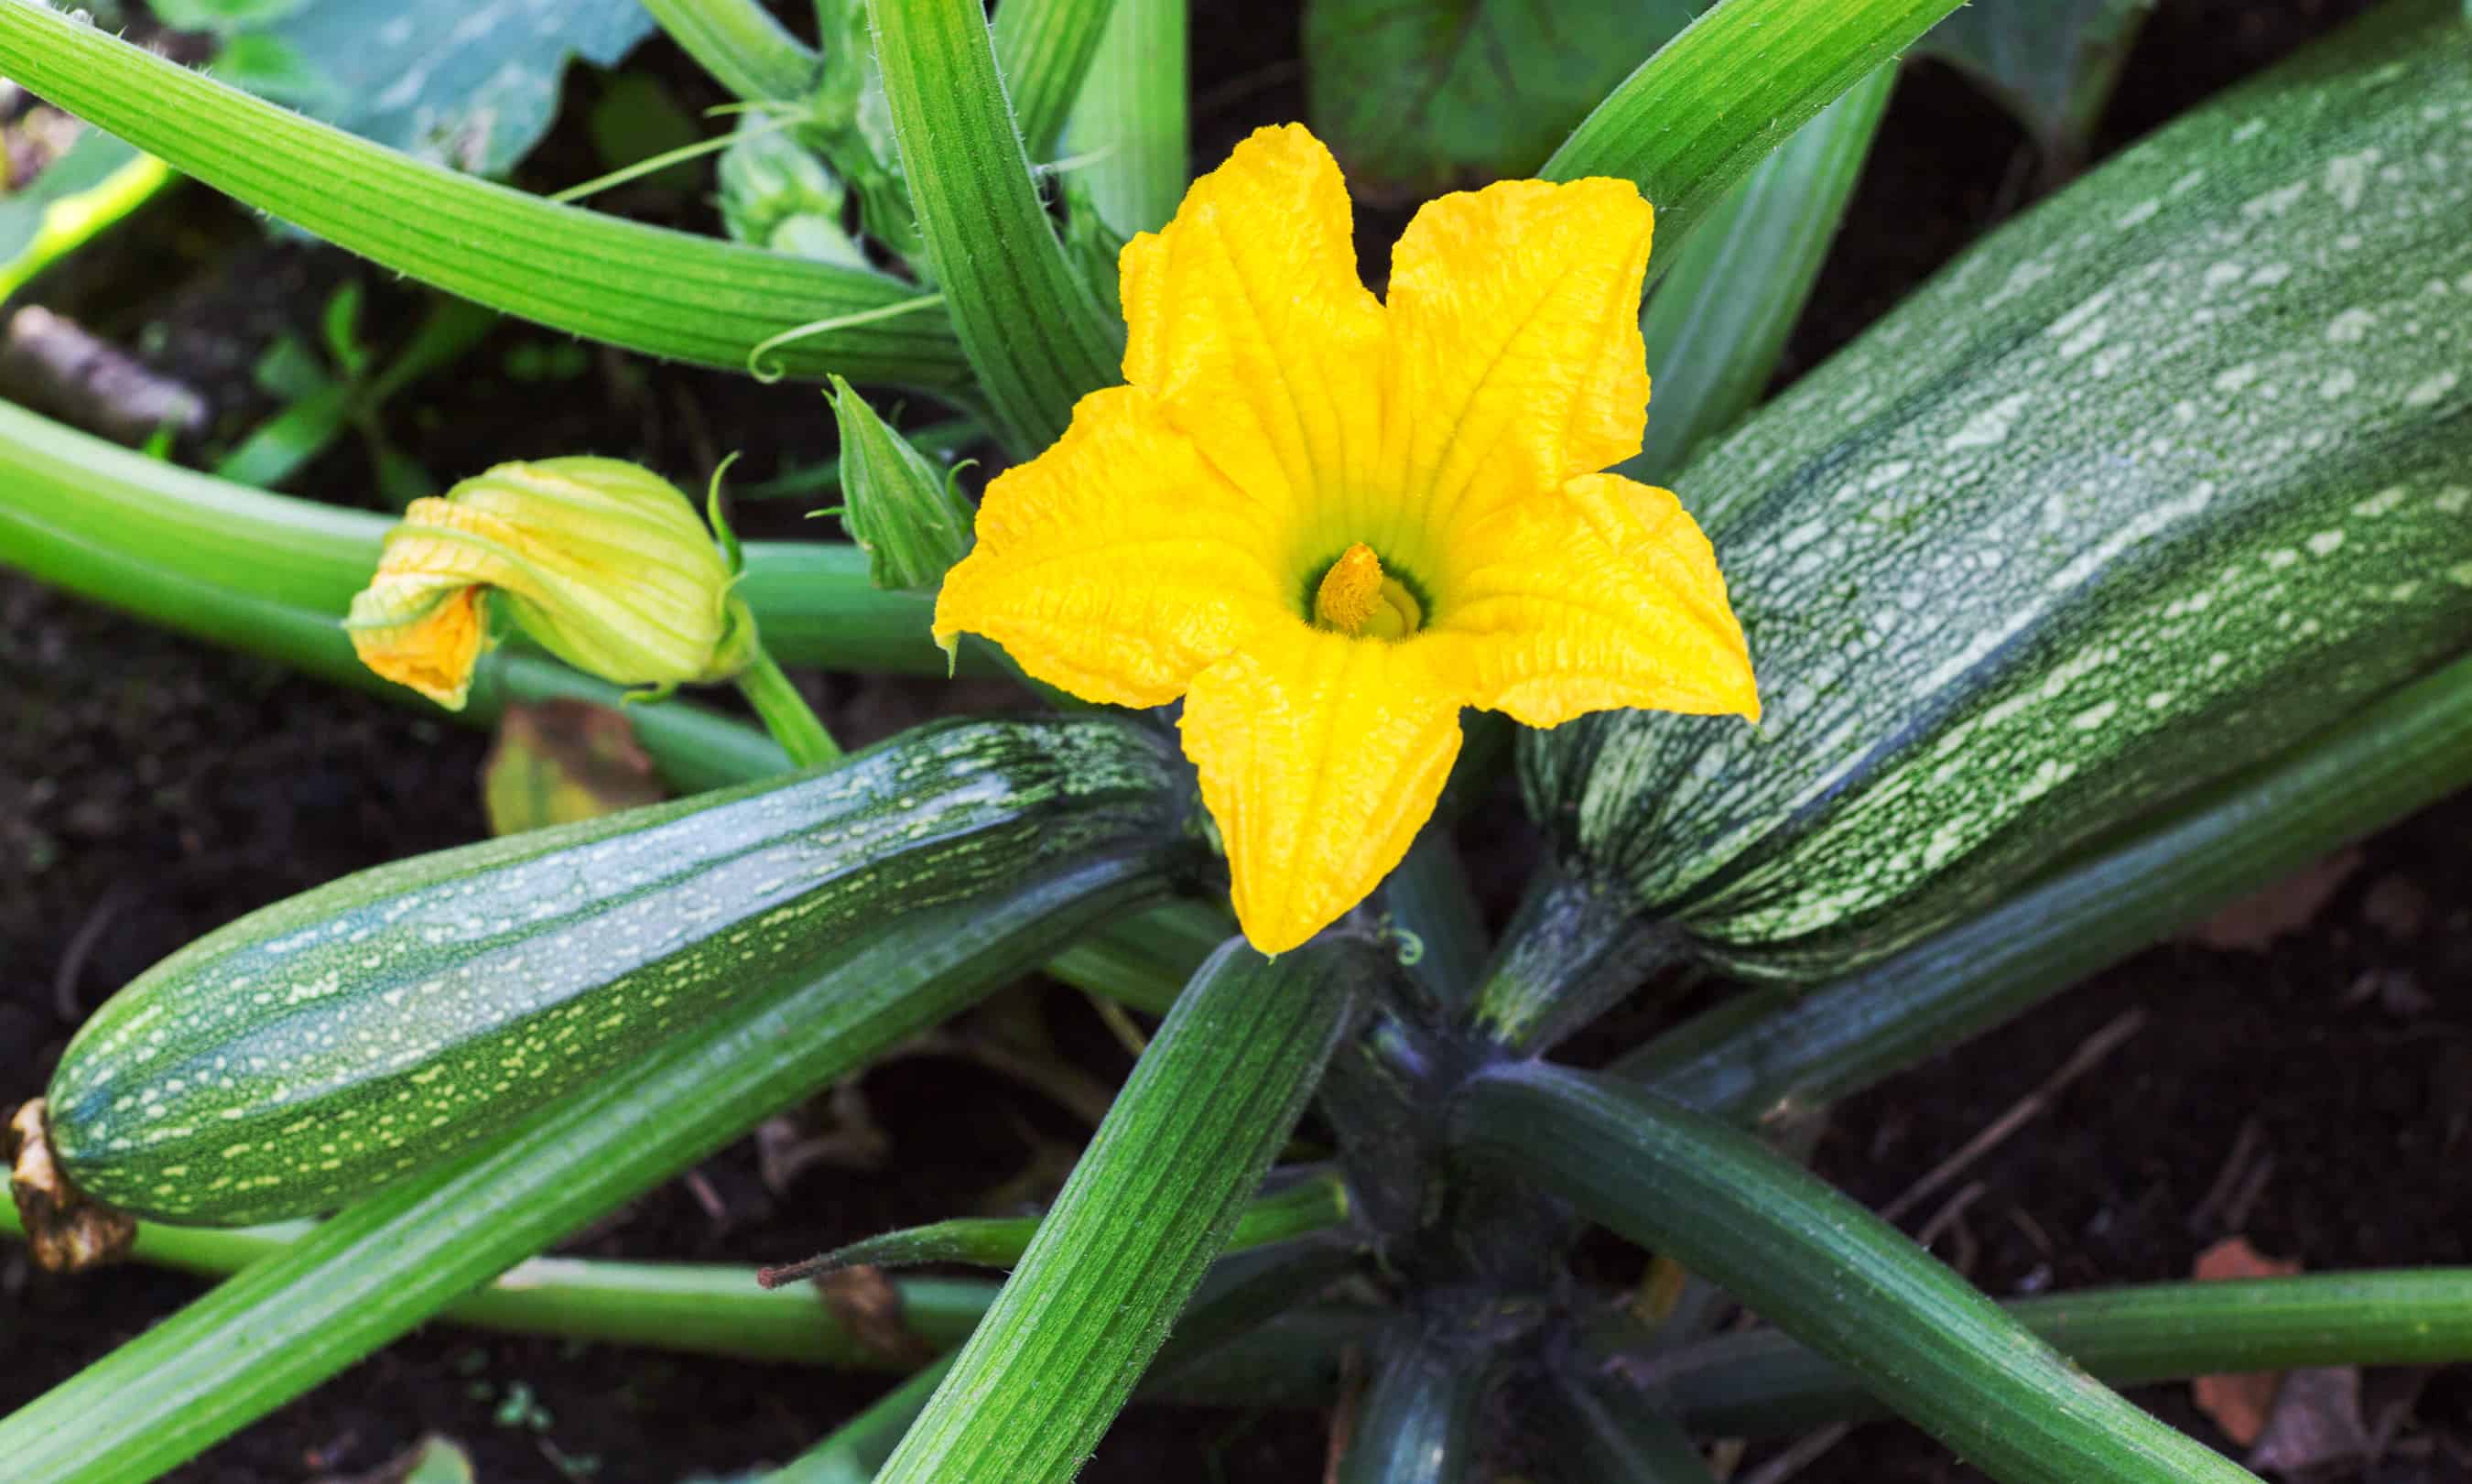 Courgettes with a yellow flower